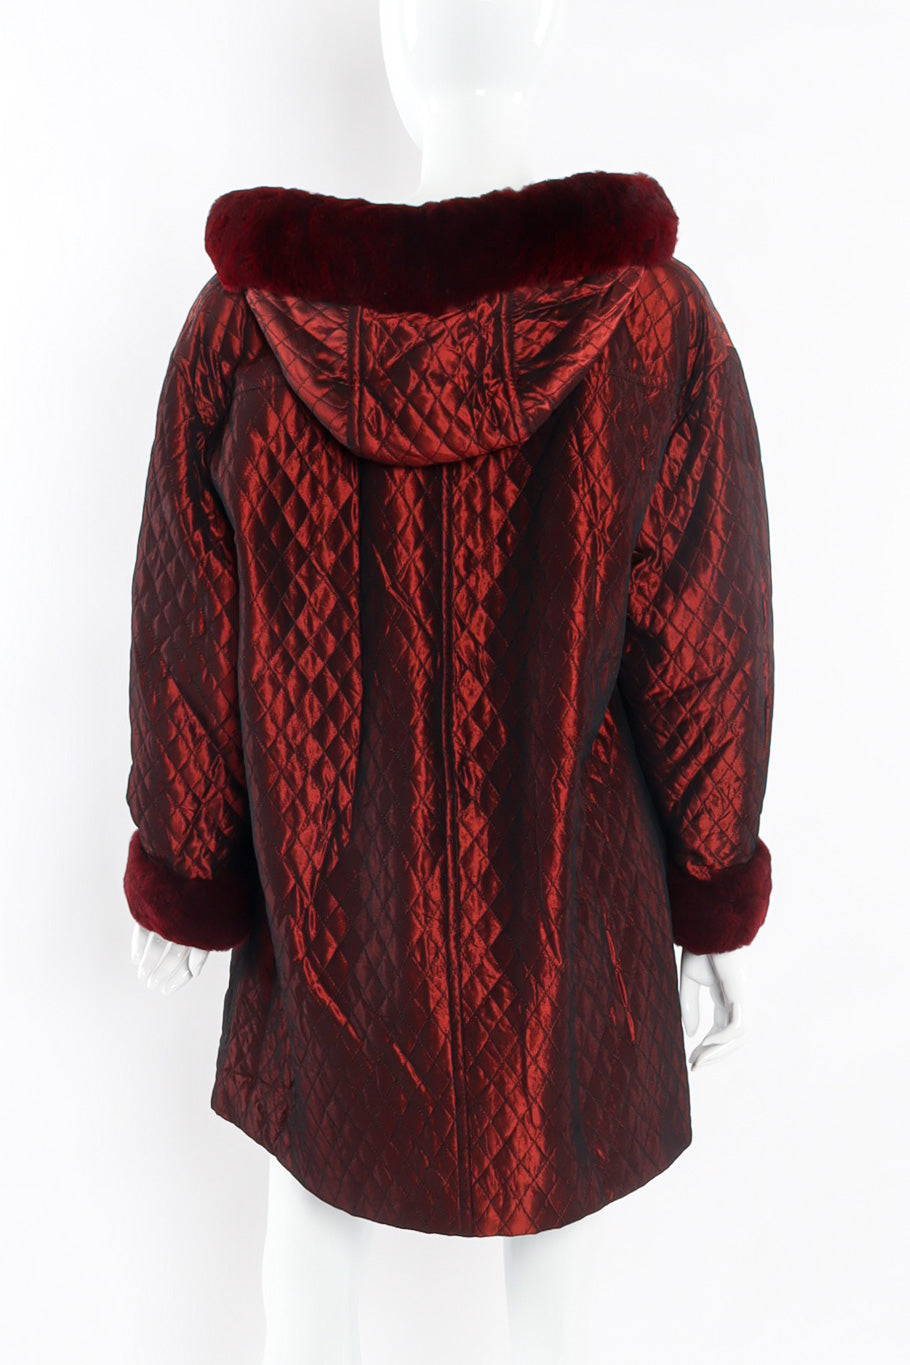 Effervescent quilted burgundy fur lined parka by Yves Saint Laurent back view photo @recessla